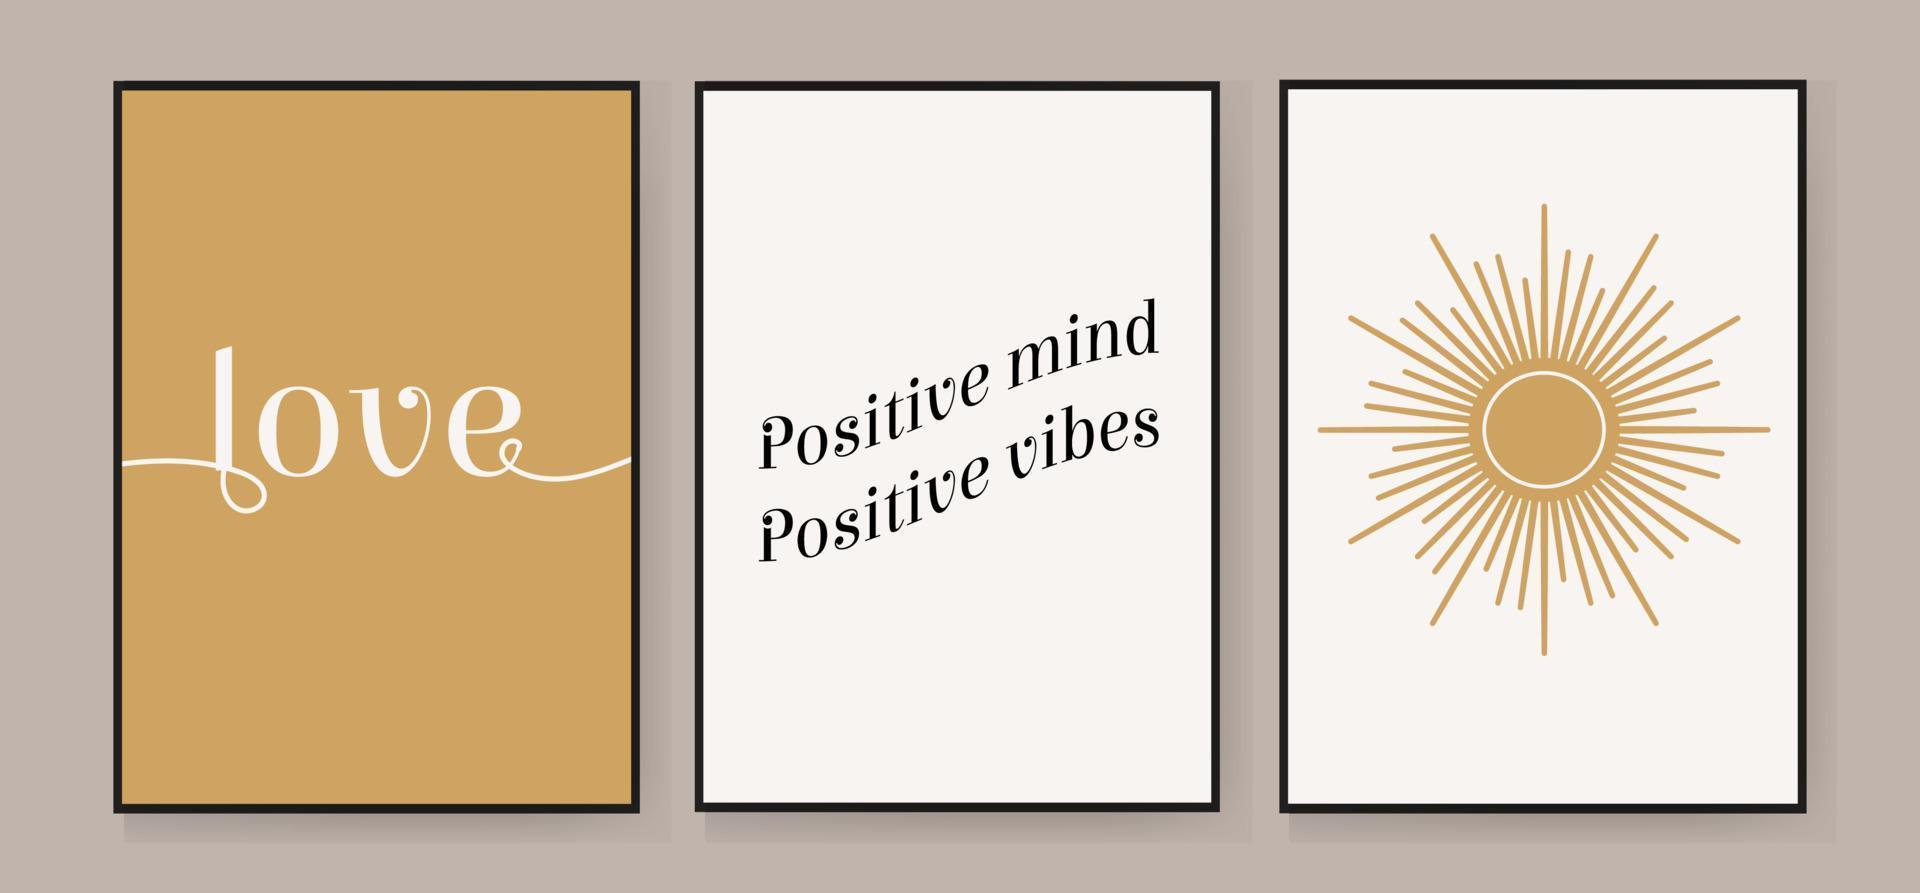 Positive mind, positive vibes, love. set of 3 creative abstract illustrations for decorating walls, decorating postcards or brochures. Vector EPS10.